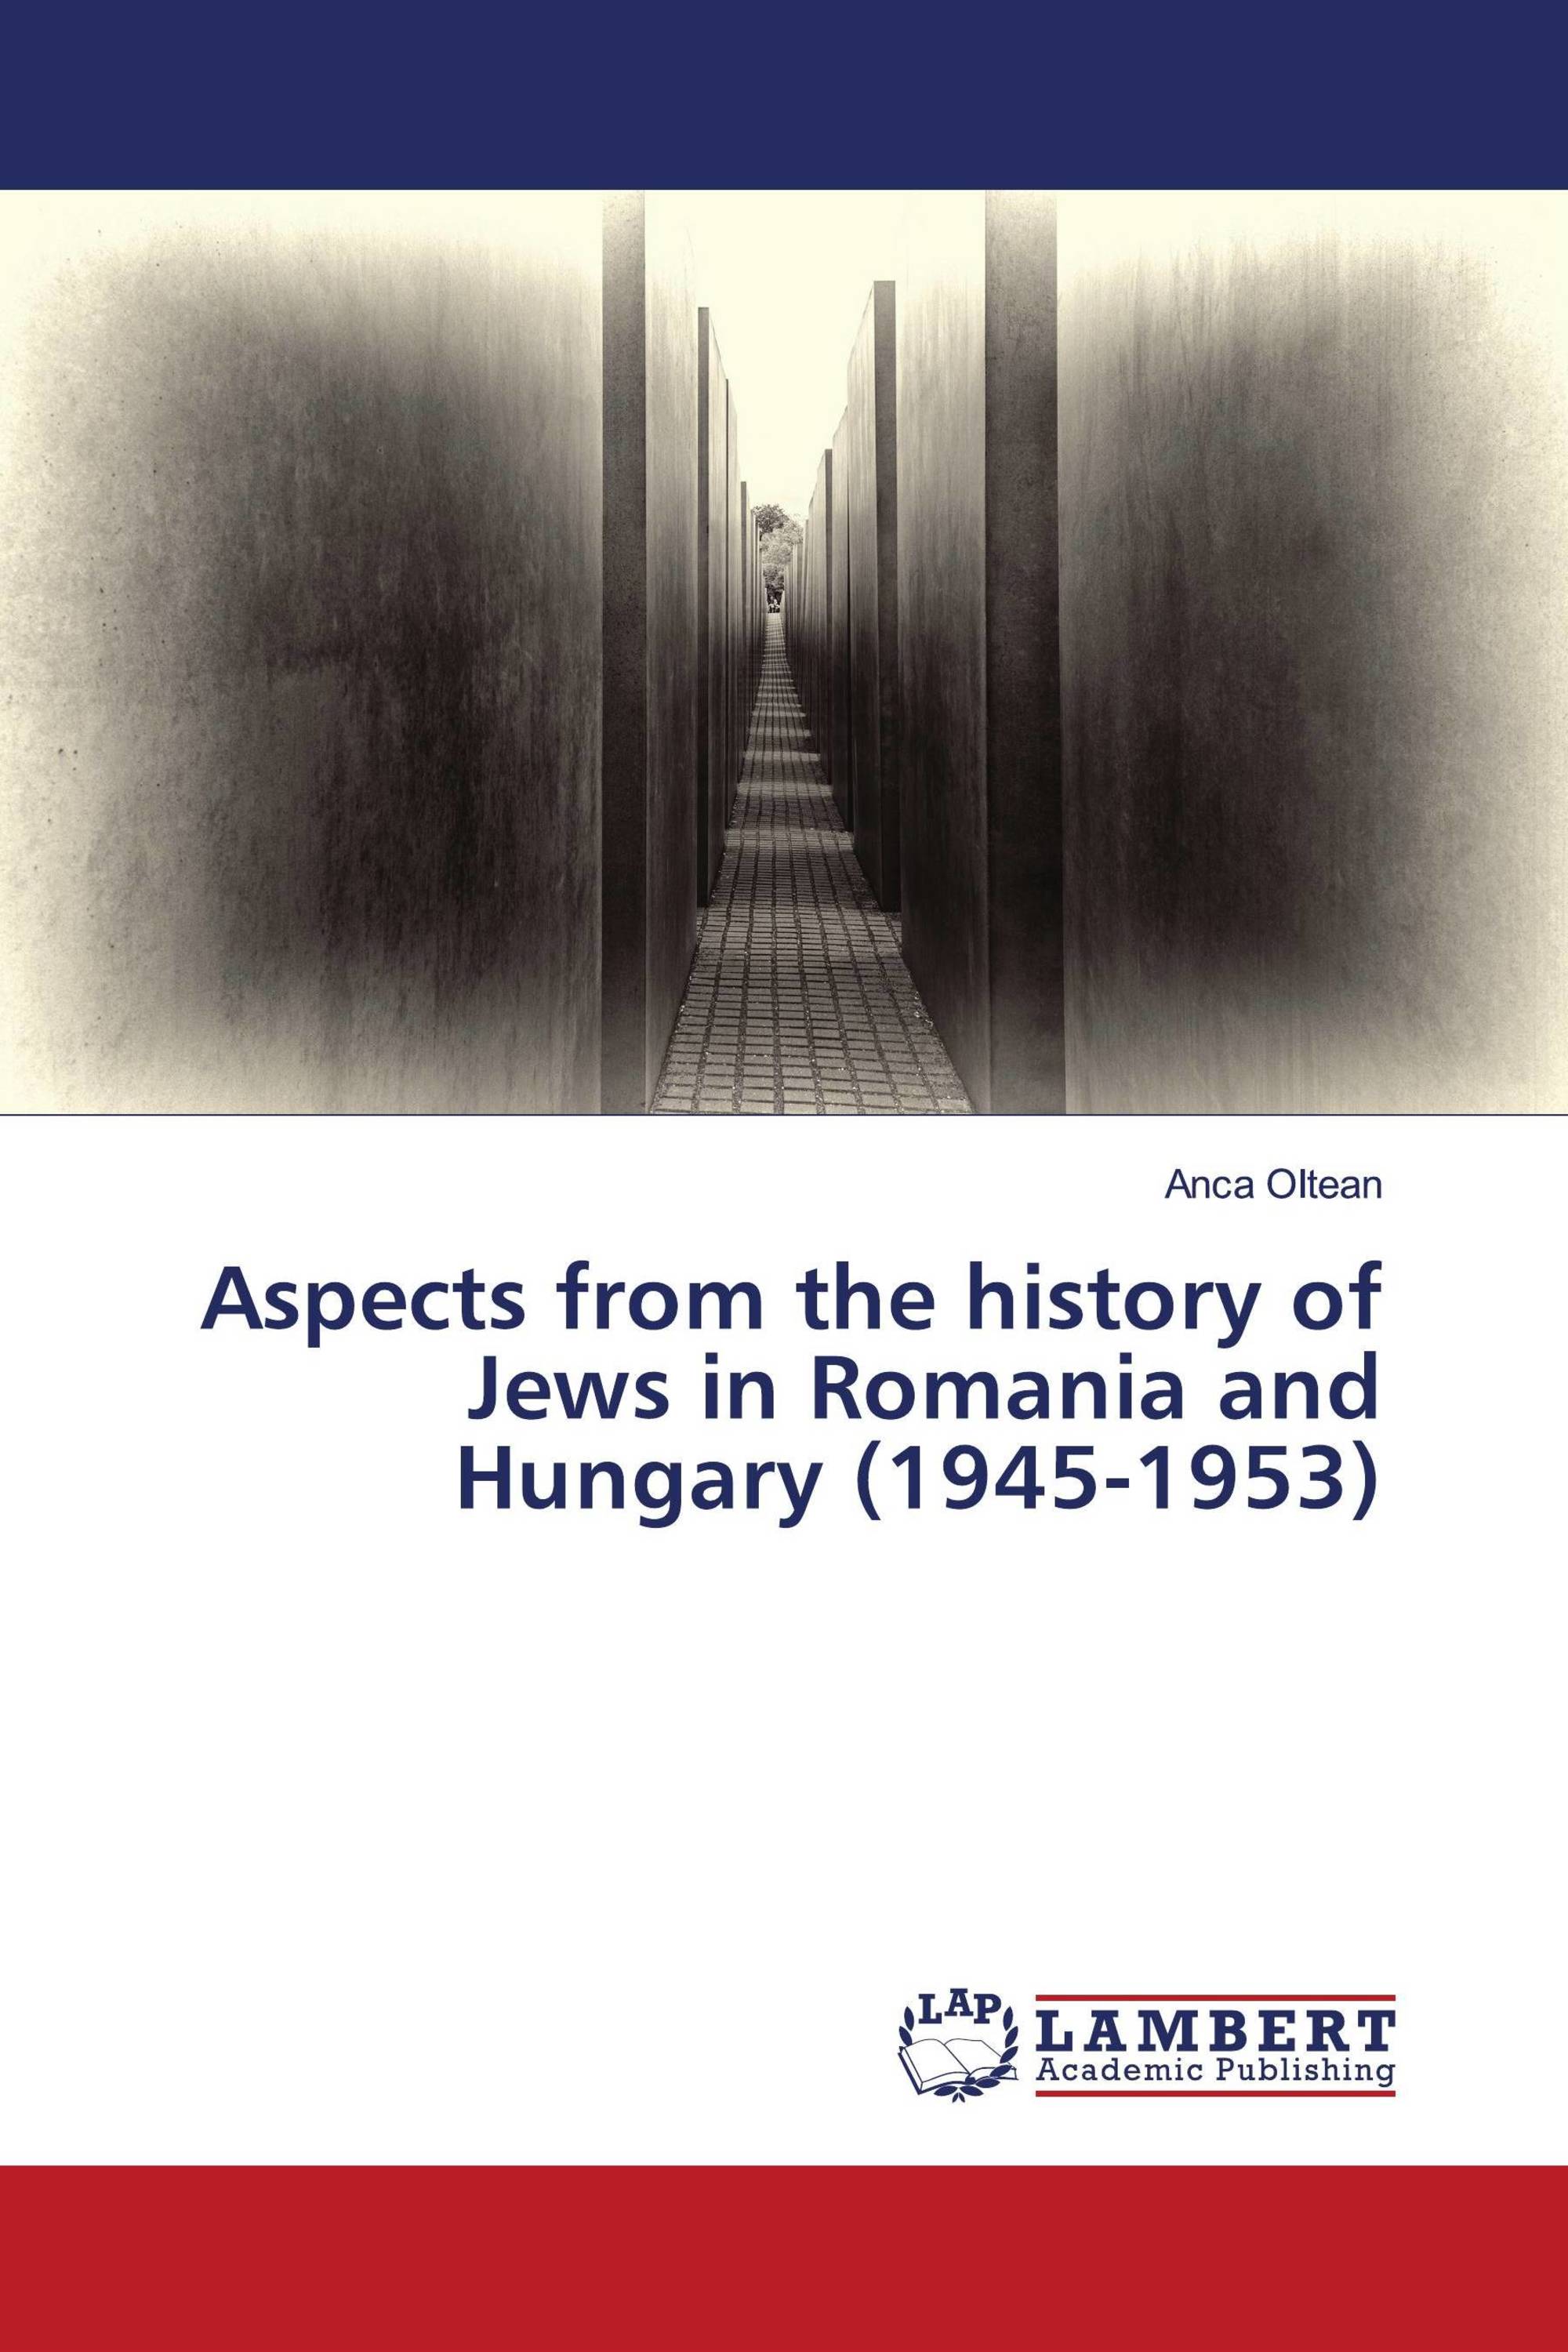 Aspects from the history of Jews in Romania and Hungary (1945-1953)